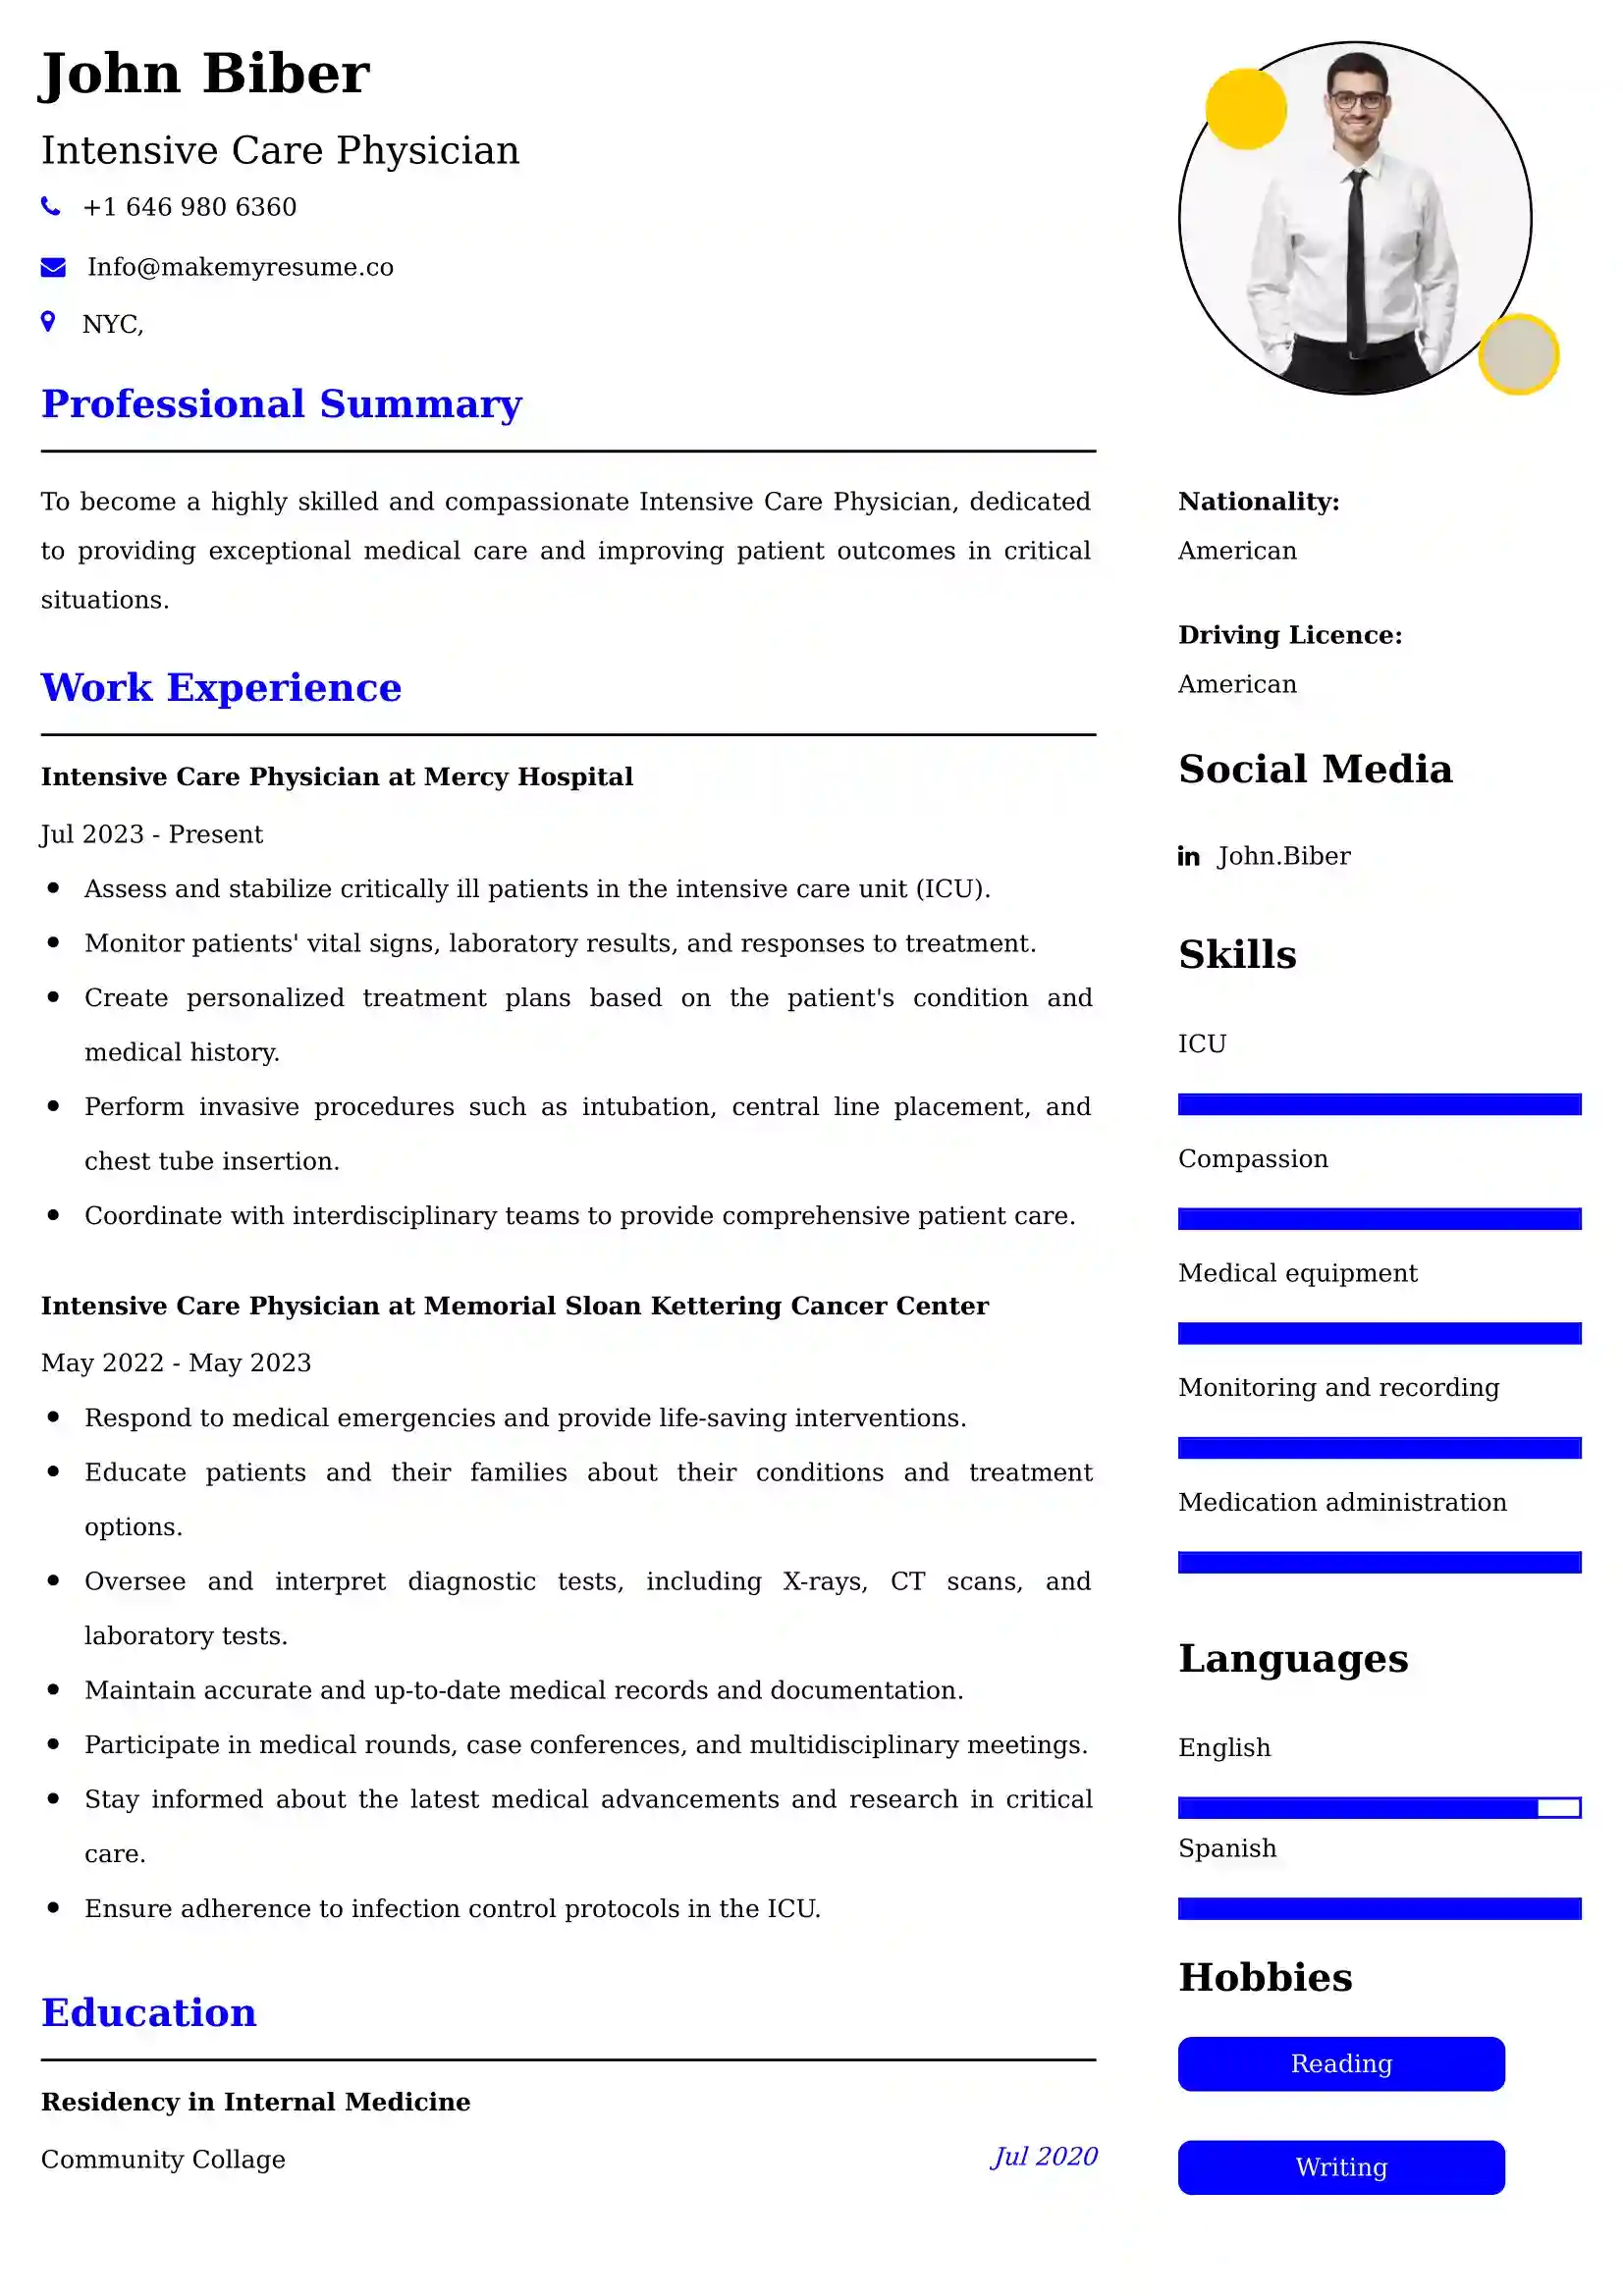 42+ Professional Medical Resume Examples, Latest CV Format